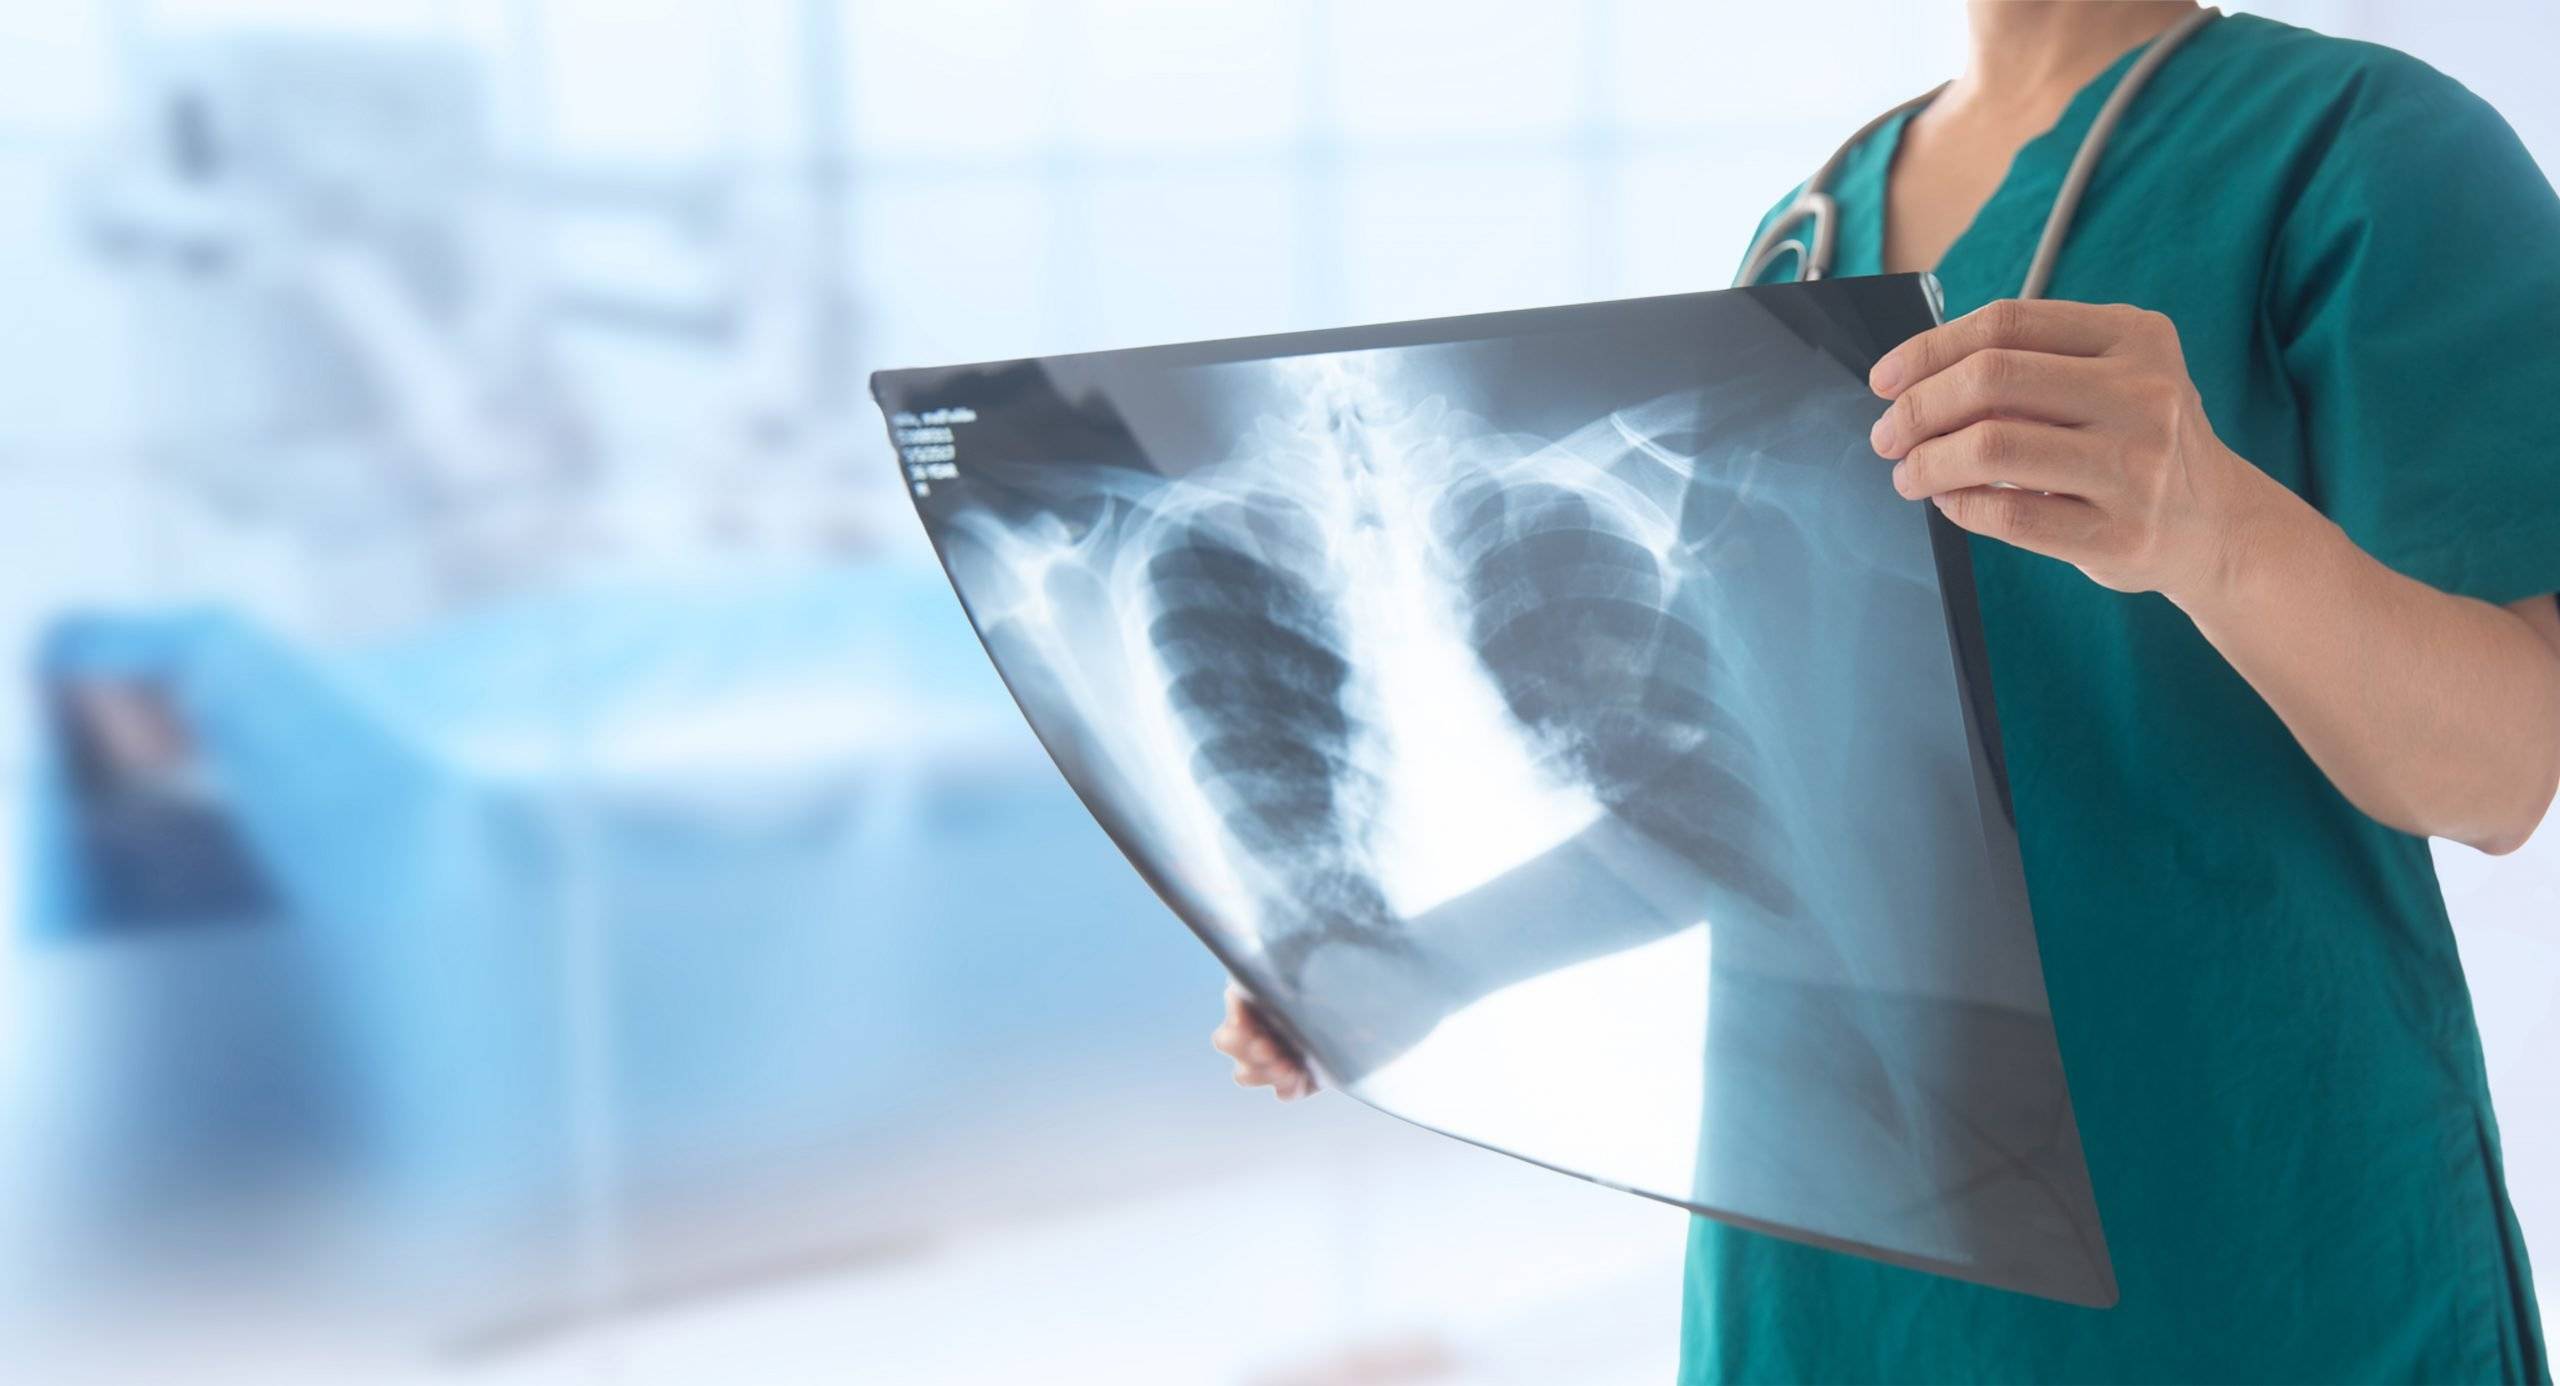 Why should you get a bachelors in radiologic technology?